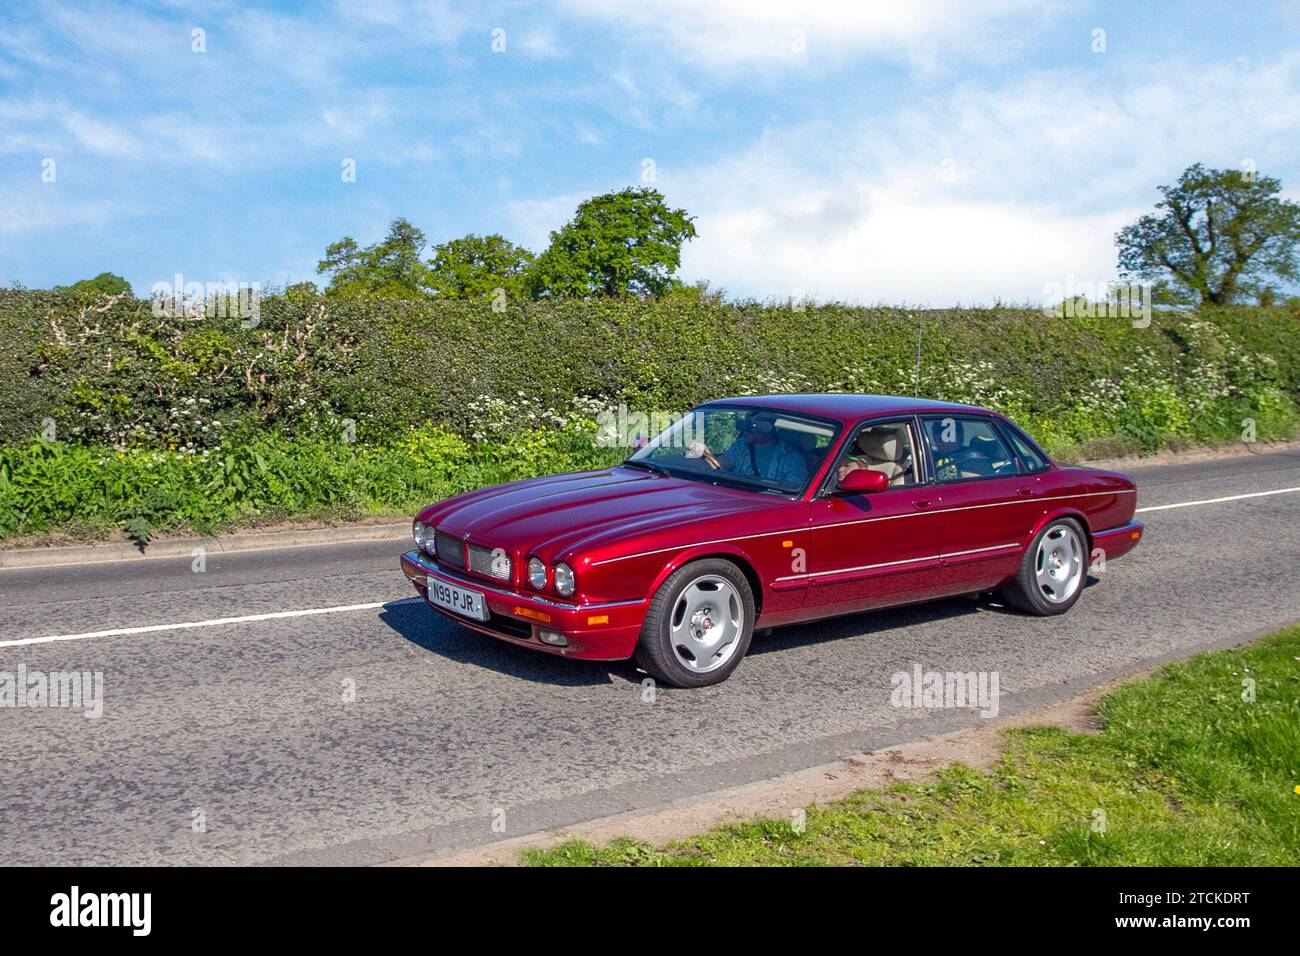 1996 90s nineties Jaguar Xjr Auto V6 S/C SWB Auto Red Car executive Saloon Petrol 3980 cc; Vintage, restored classic motors, automobile collectors motoring enthusiasts, historic veteran cars travelling in Cheshire, UK Stock Photo